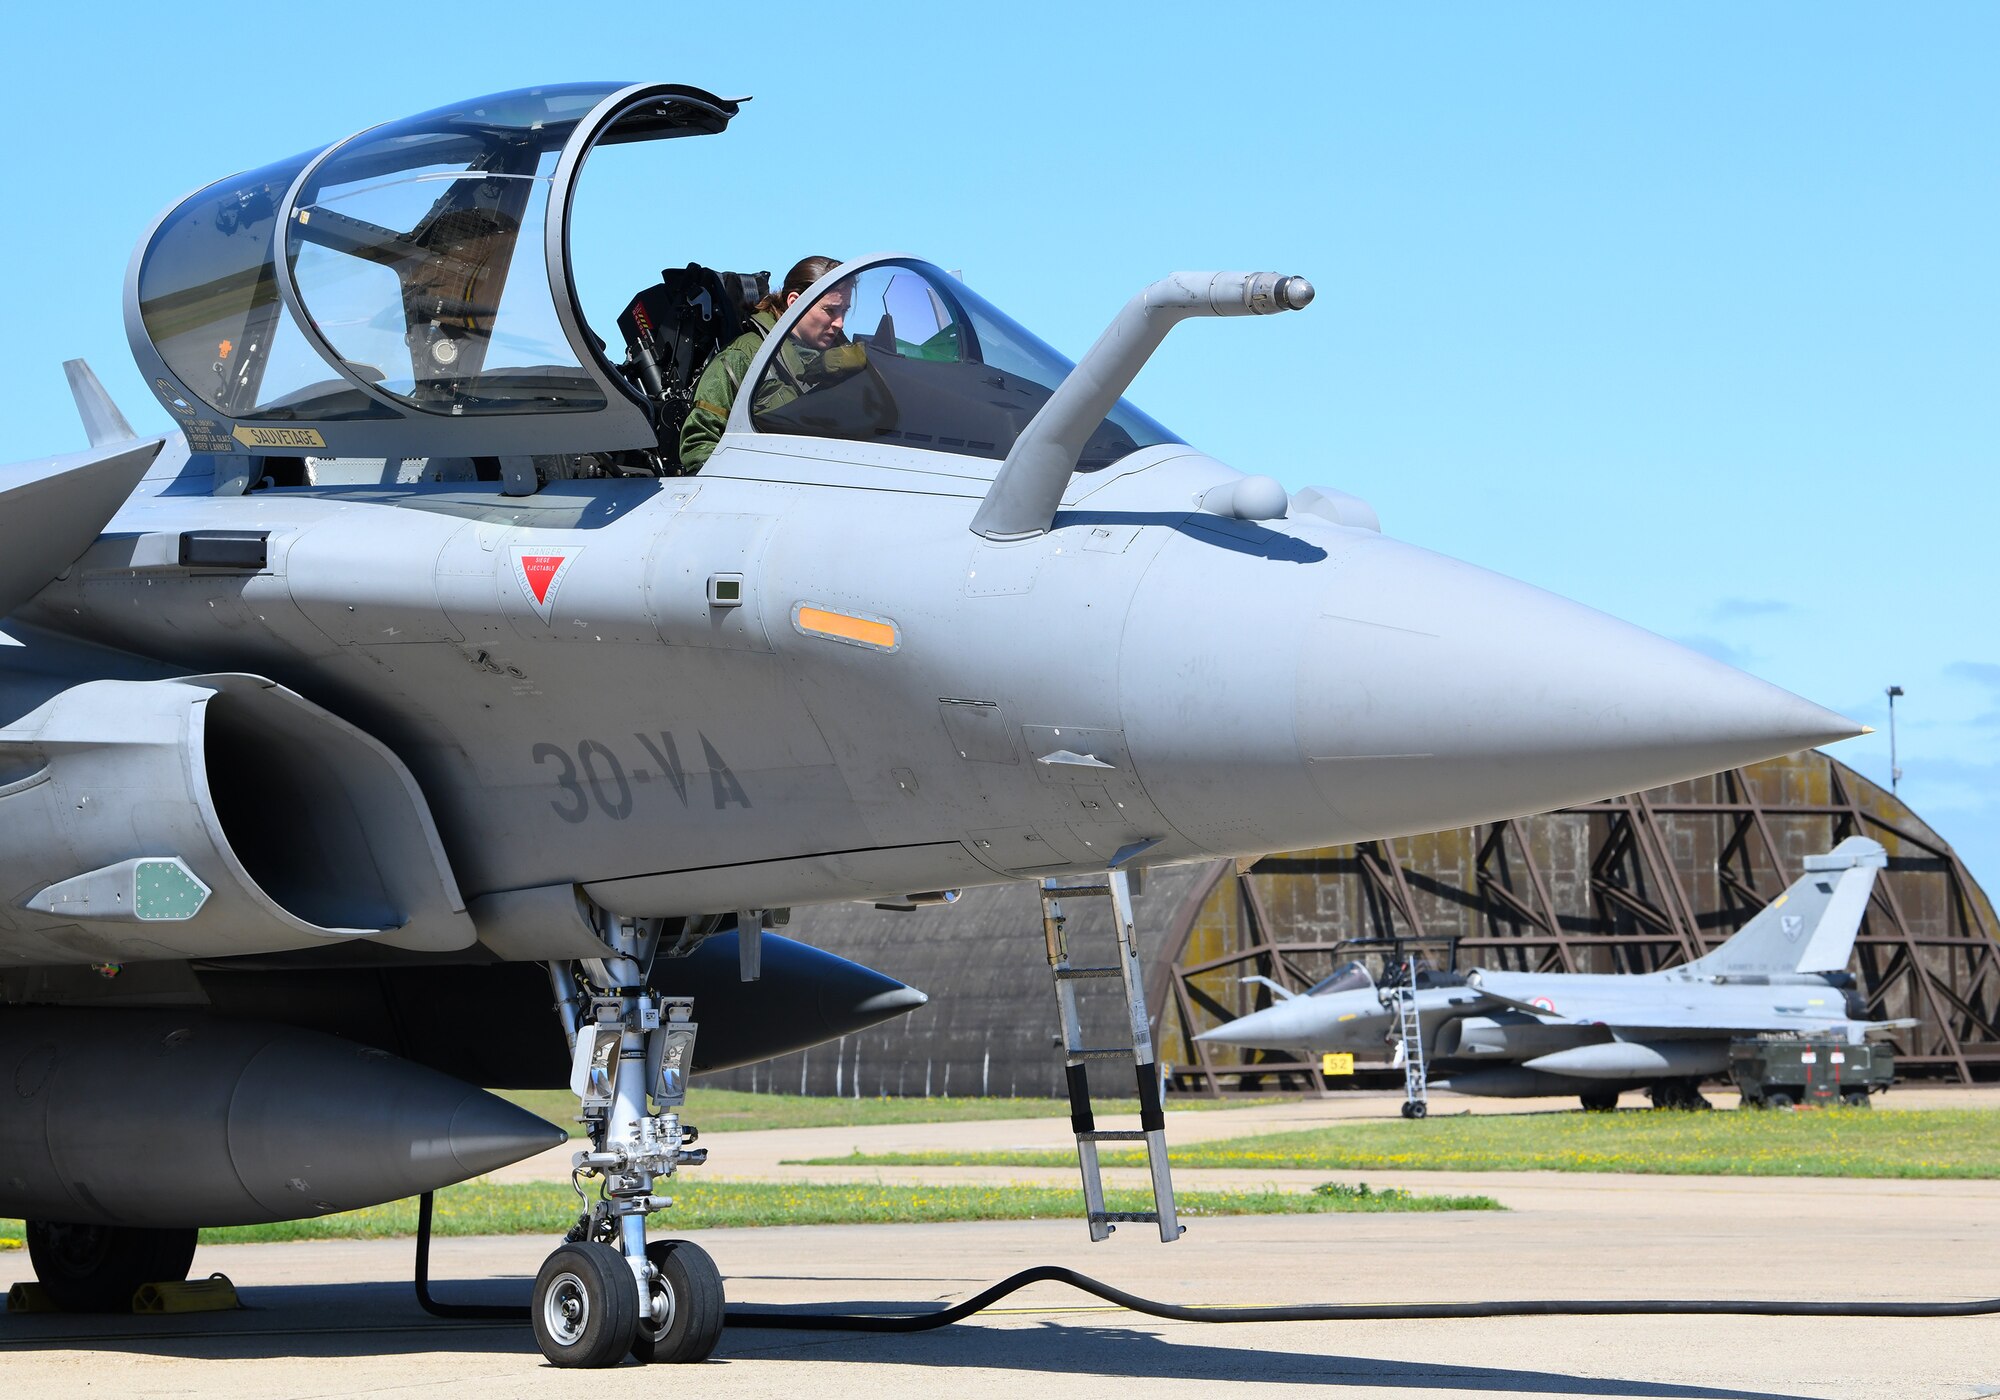 A French Air Force pilot prepares a Rafale for takeoff during exercise Point Blank 19-2 at Royal Air Force Lakenheath, England, June 17, 2019. During this trilateral exercise, participating air forces are enhancing professional relationships and improving overall coordination with allies and partner militaries during times of crisis. (U.S. Air Force photo by Staff Sgt. Alex Fox Echols III/Released)